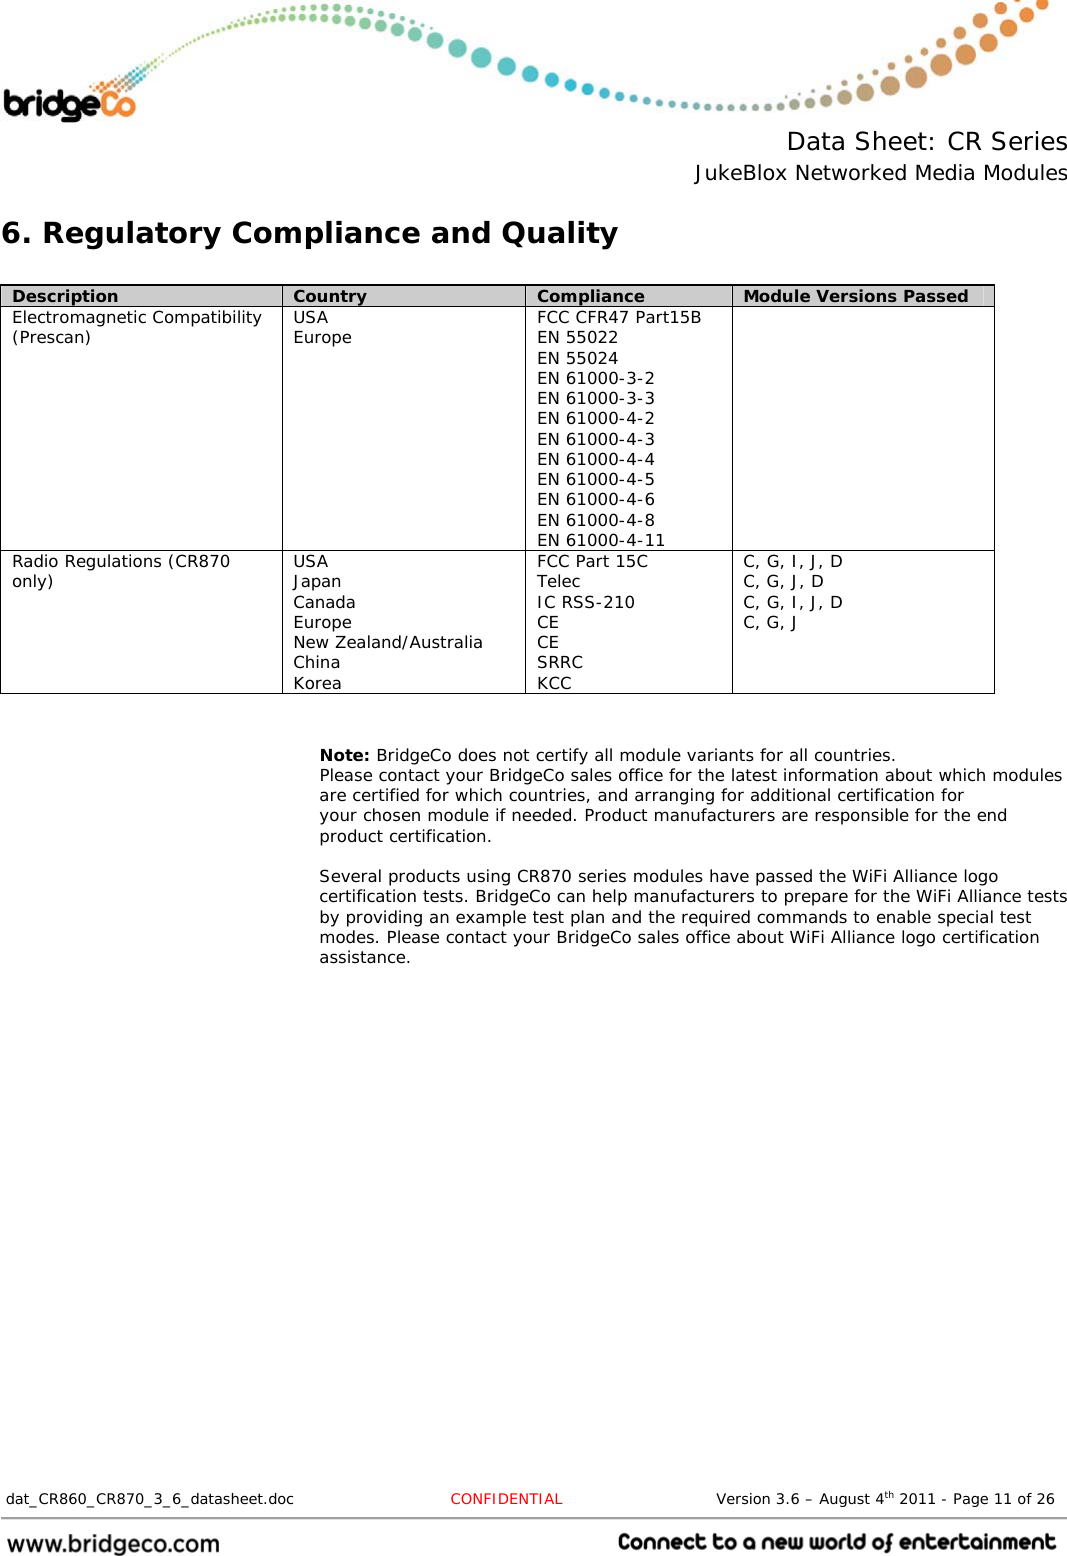  Data Sheet: CR Series JukeBlox Networked Media Modules  dat_CR860_CR870_3_6_datasheet.doc  CONFIDENTIAL                              Version 3.6 – August 4th 2011 - Page 11 of 26                                 6. Regulatory Compliance and Quality  Description  Country  Compliance  Module Versions Passed Electromagnetic Compatibility (Prescan)  USA Europe  FCC CFR47 Part15B EN 55022 EN 55024 EN 61000-3-2 EN 61000-3-3 EN 61000-4-2 EN 61000-4-3 EN 61000-4-4 EN 61000-4-5 EN 61000-4-6 EN 61000-4-8 EN 61000-4-11  Radio Regulations (CR870 only)  USA Japan Canada Europe New Zealand/Australia China Korea FCC Part 15C Telec IC RSS-210 CE CE SRRC KCC C, G, I, J, D C, G, J, D C, G, I, J, D C, G, J   Note: BridgeCo does not certify all module variants for all countries. Please contact your BridgeCo sales office for the latest information about which modules are certified for which countries, and arranging for additional certification for your chosen module if needed. Product manufacturers are responsible for the end product certification.  Several products using CR870 series modules have passed the WiFi Alliance logo certification tests. BridgeCo can help manufacturers to prepare for the WiFi Alliance tests by providing an example test plan and the required commands to enable special test modes. Please contact your BridgeCo sales office about WiFi Alliance logo certification assistance.  